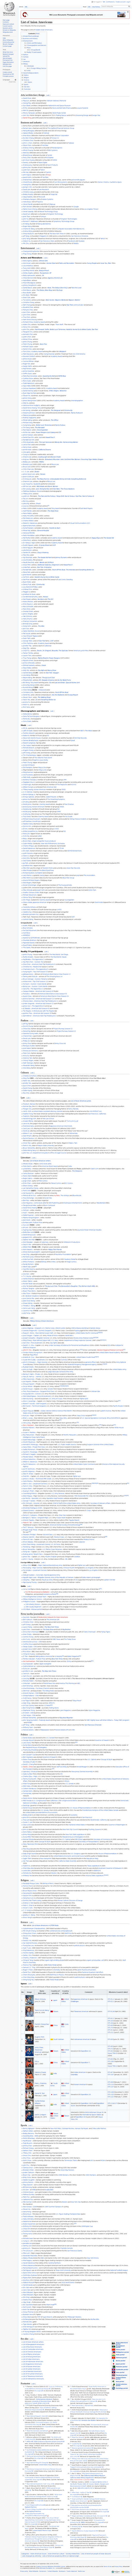 List of Asian Americans - Wikipedia